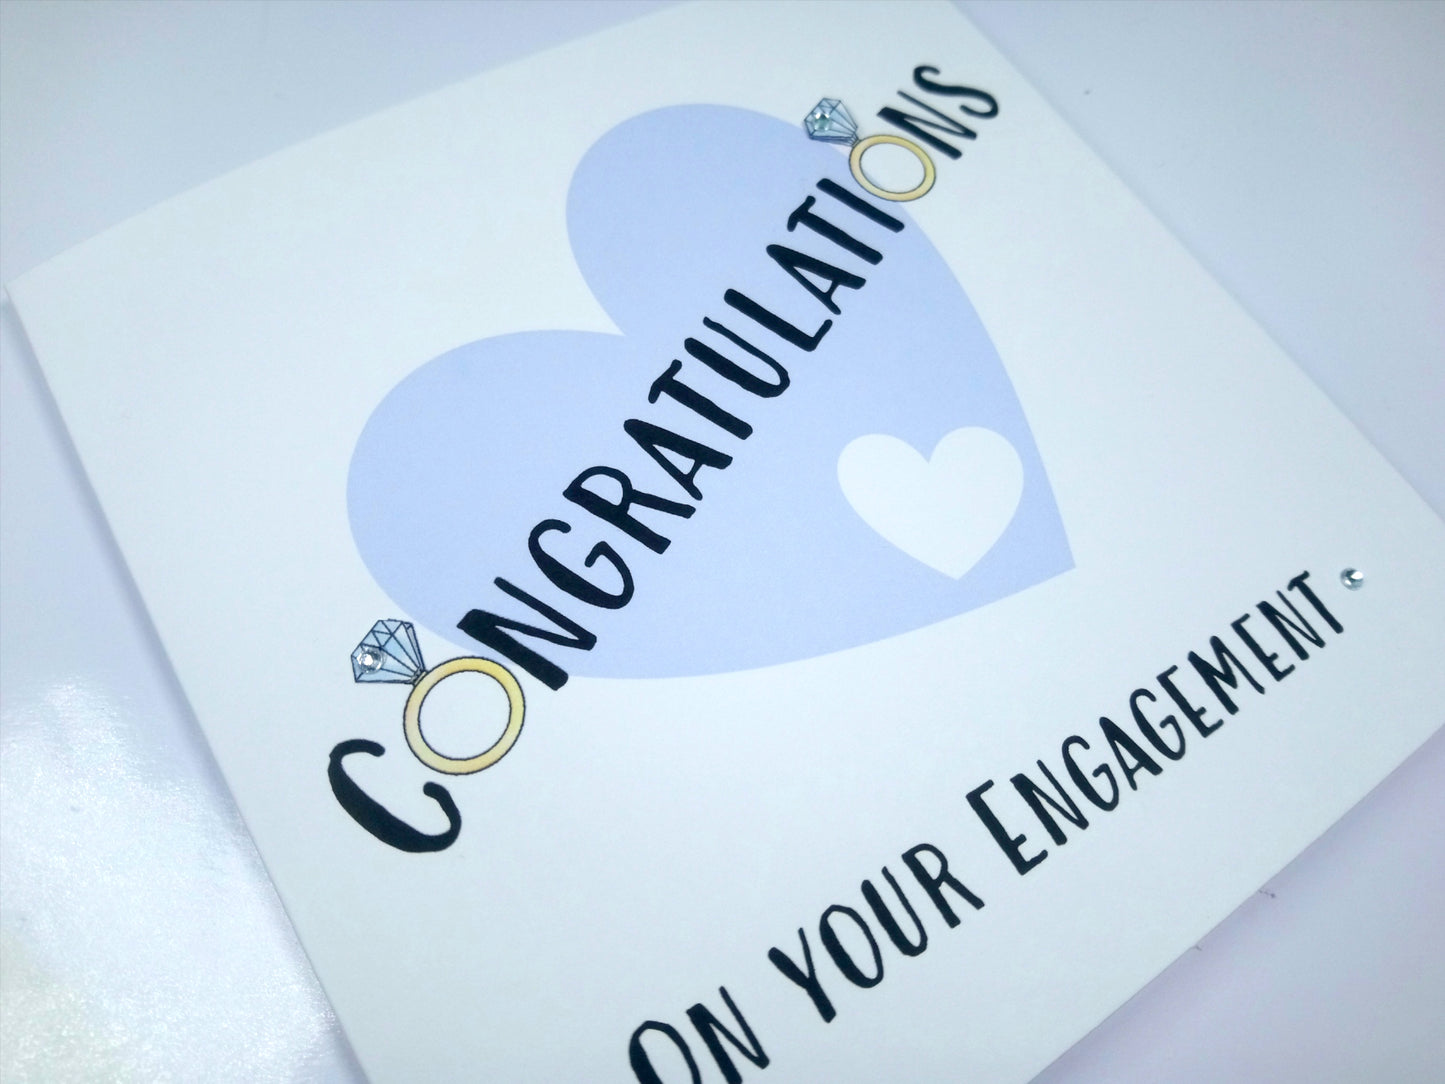 Congratulations on your Engagement Card - Blue Heart